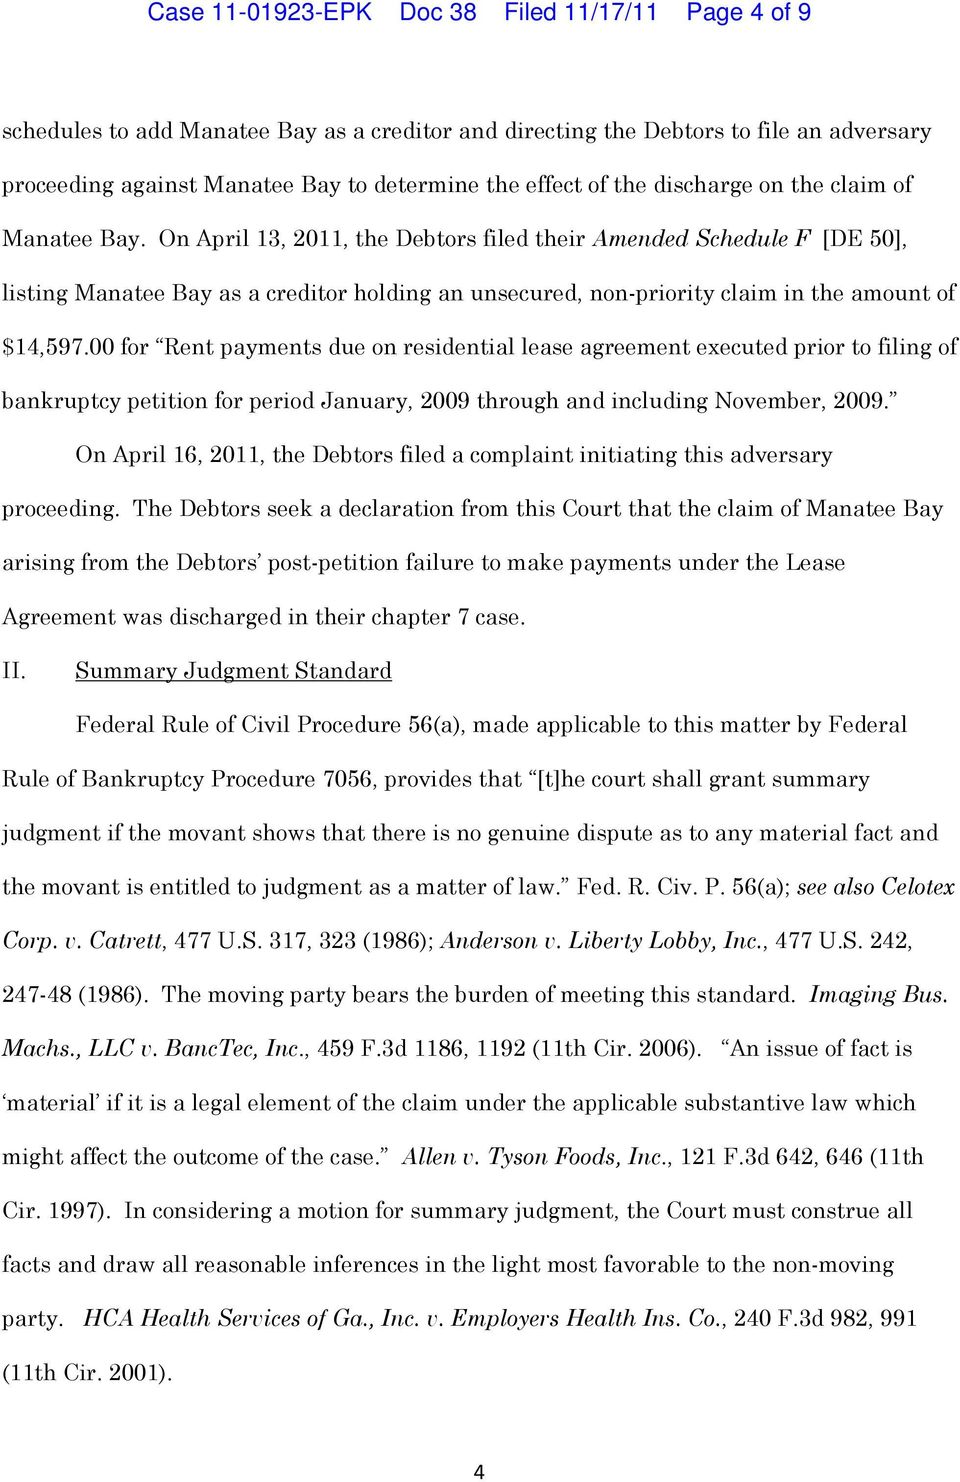 On April 13, 2011, the Debtors filed their Amended Schedule F [DE 50], listing Manatee Bay as a creditor holding an unsecured, non-priority claim in the amount of $14,597.